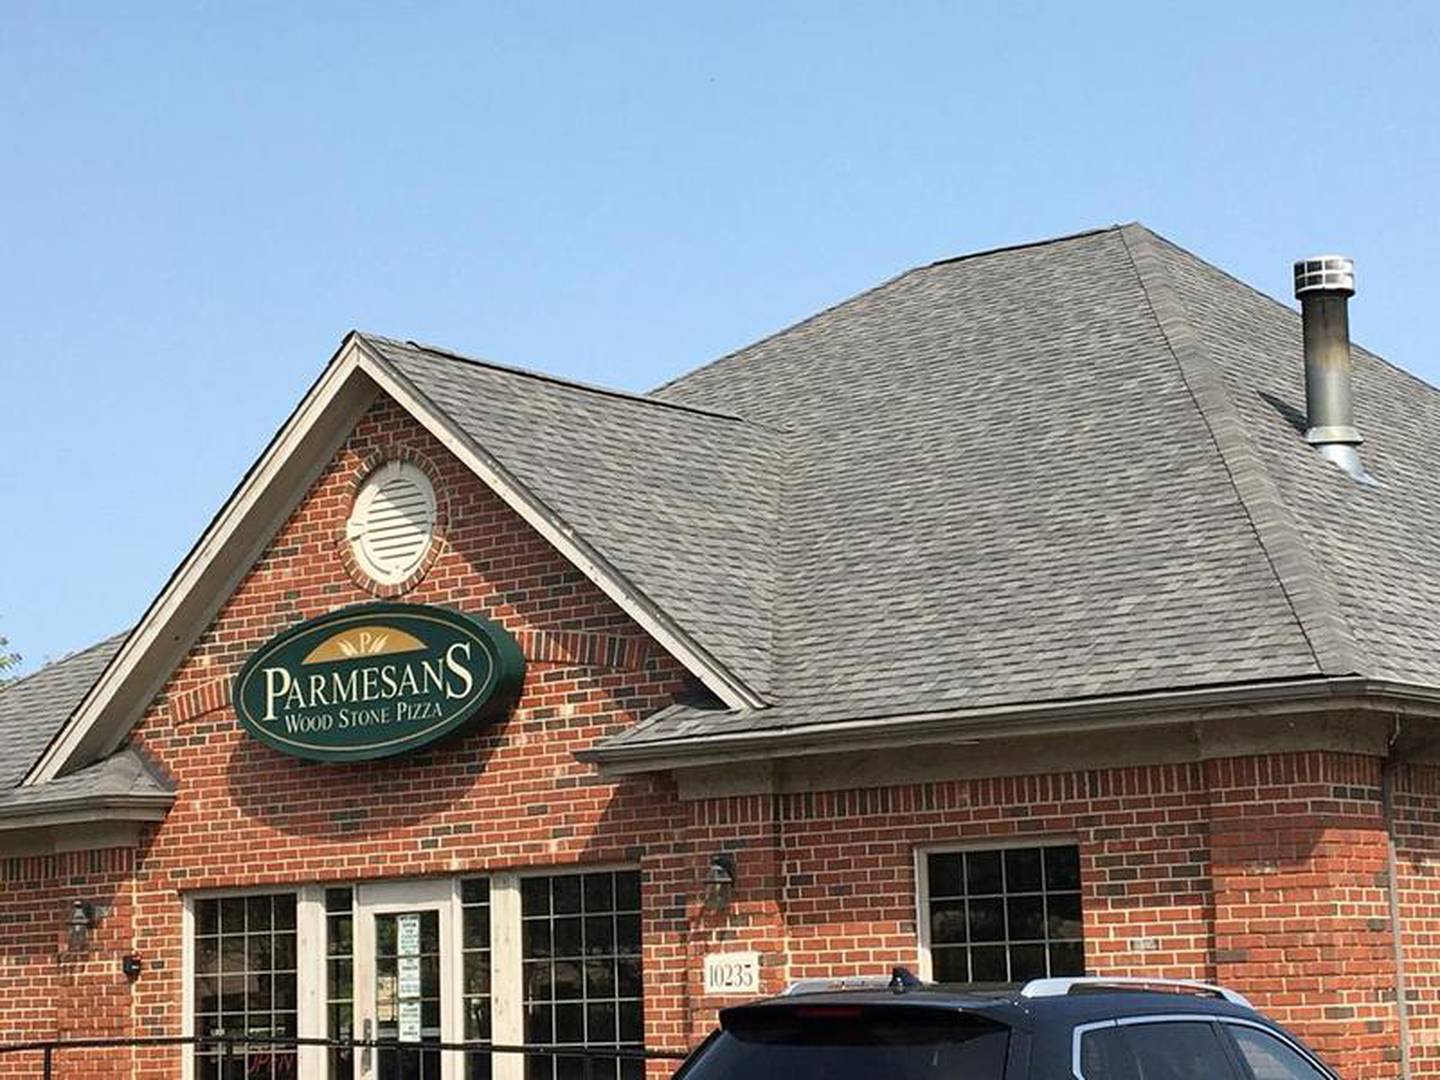 Parmesans Wood Stone Pizza, 10235 W. Lincoln Highway, Frankfort.